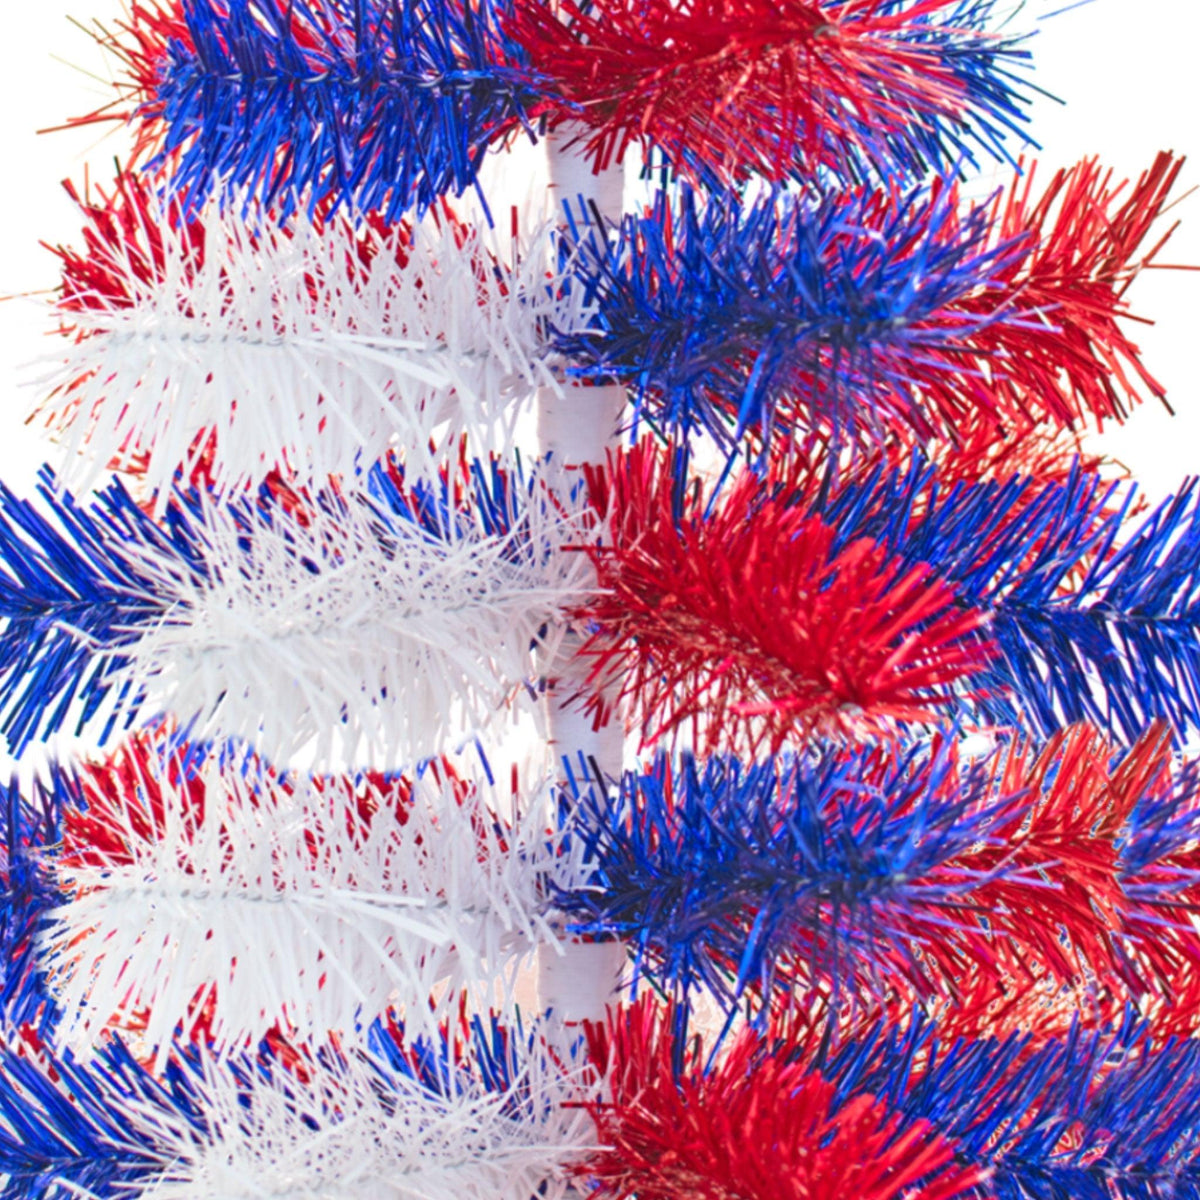 Middle branches of the 24in Tall Red White and Blue Mixed Tinsel Christmas Tree on sale at leedisplay.com.